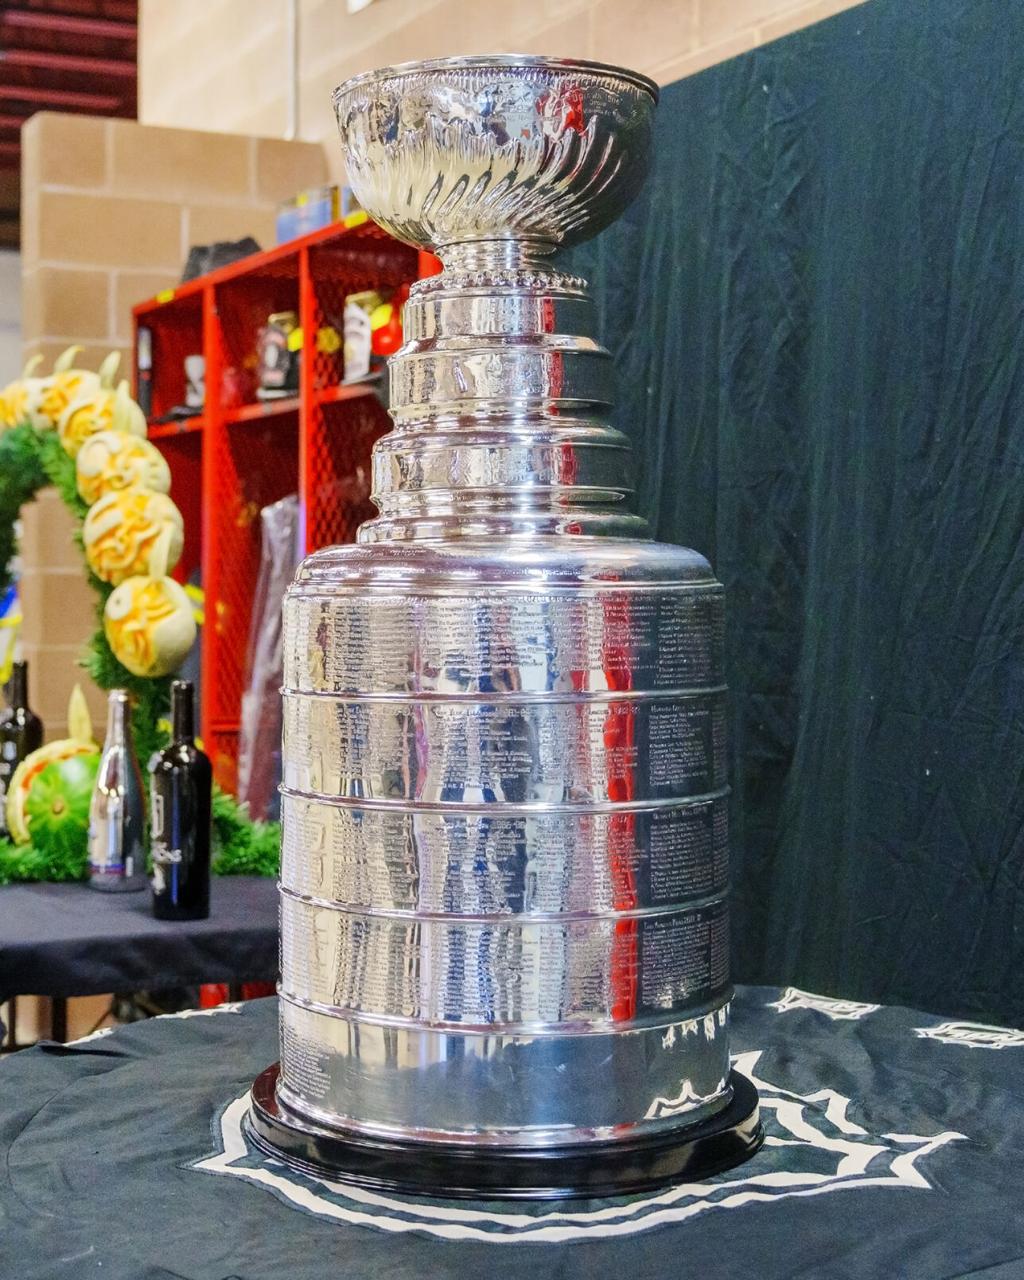 Photos: The Stanley Cup trophy comes to Lewis Ice Arena with Aspen